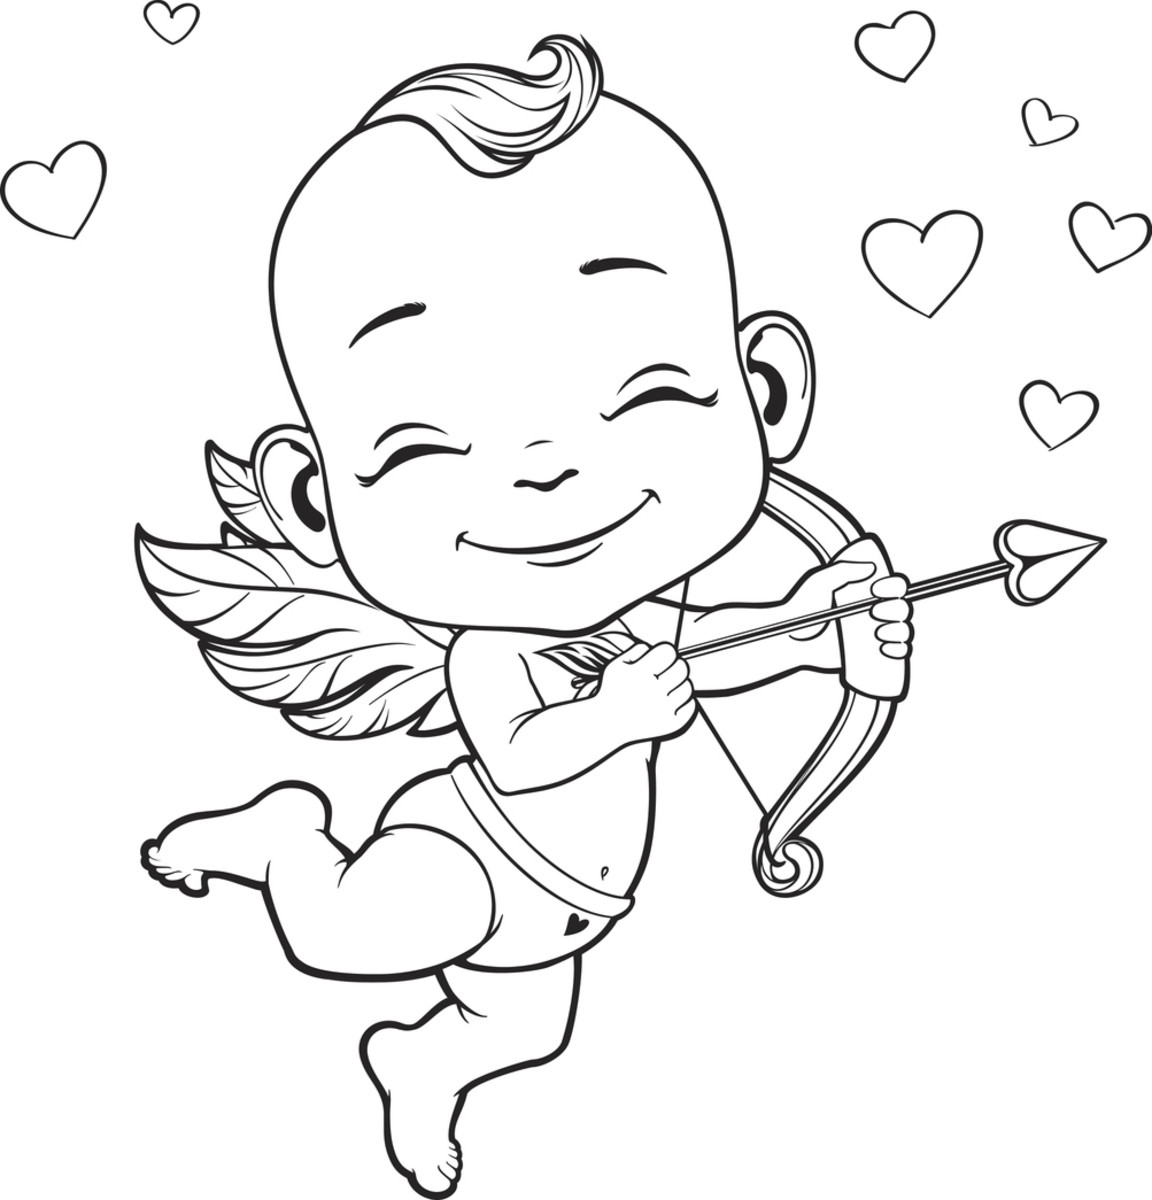 Valentines day coloring pages free printable for kids adults